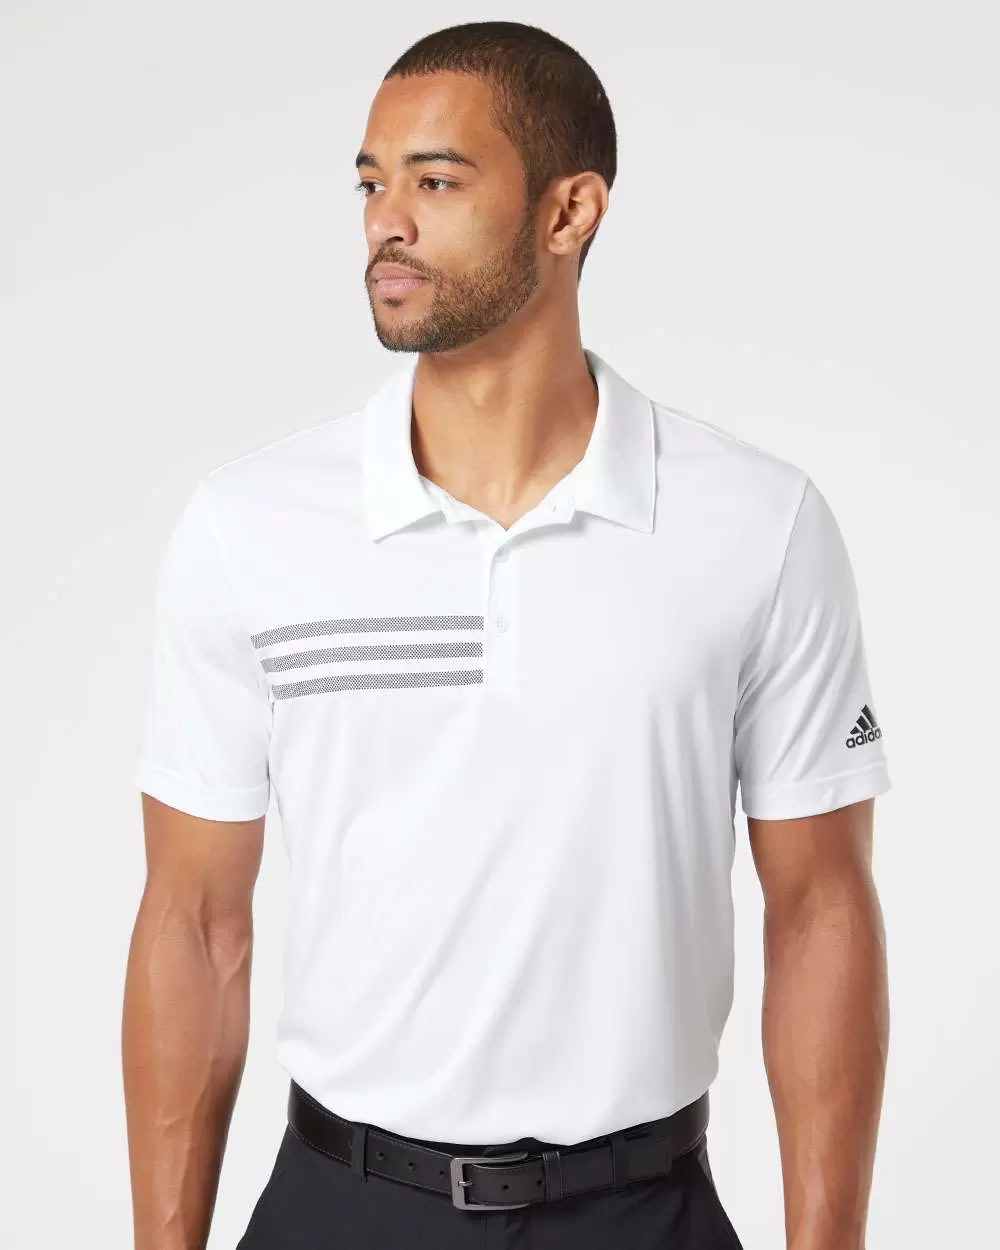 Adidas Golf Clothing A324 3-Stripes Chest Sport Shirt From $30.34